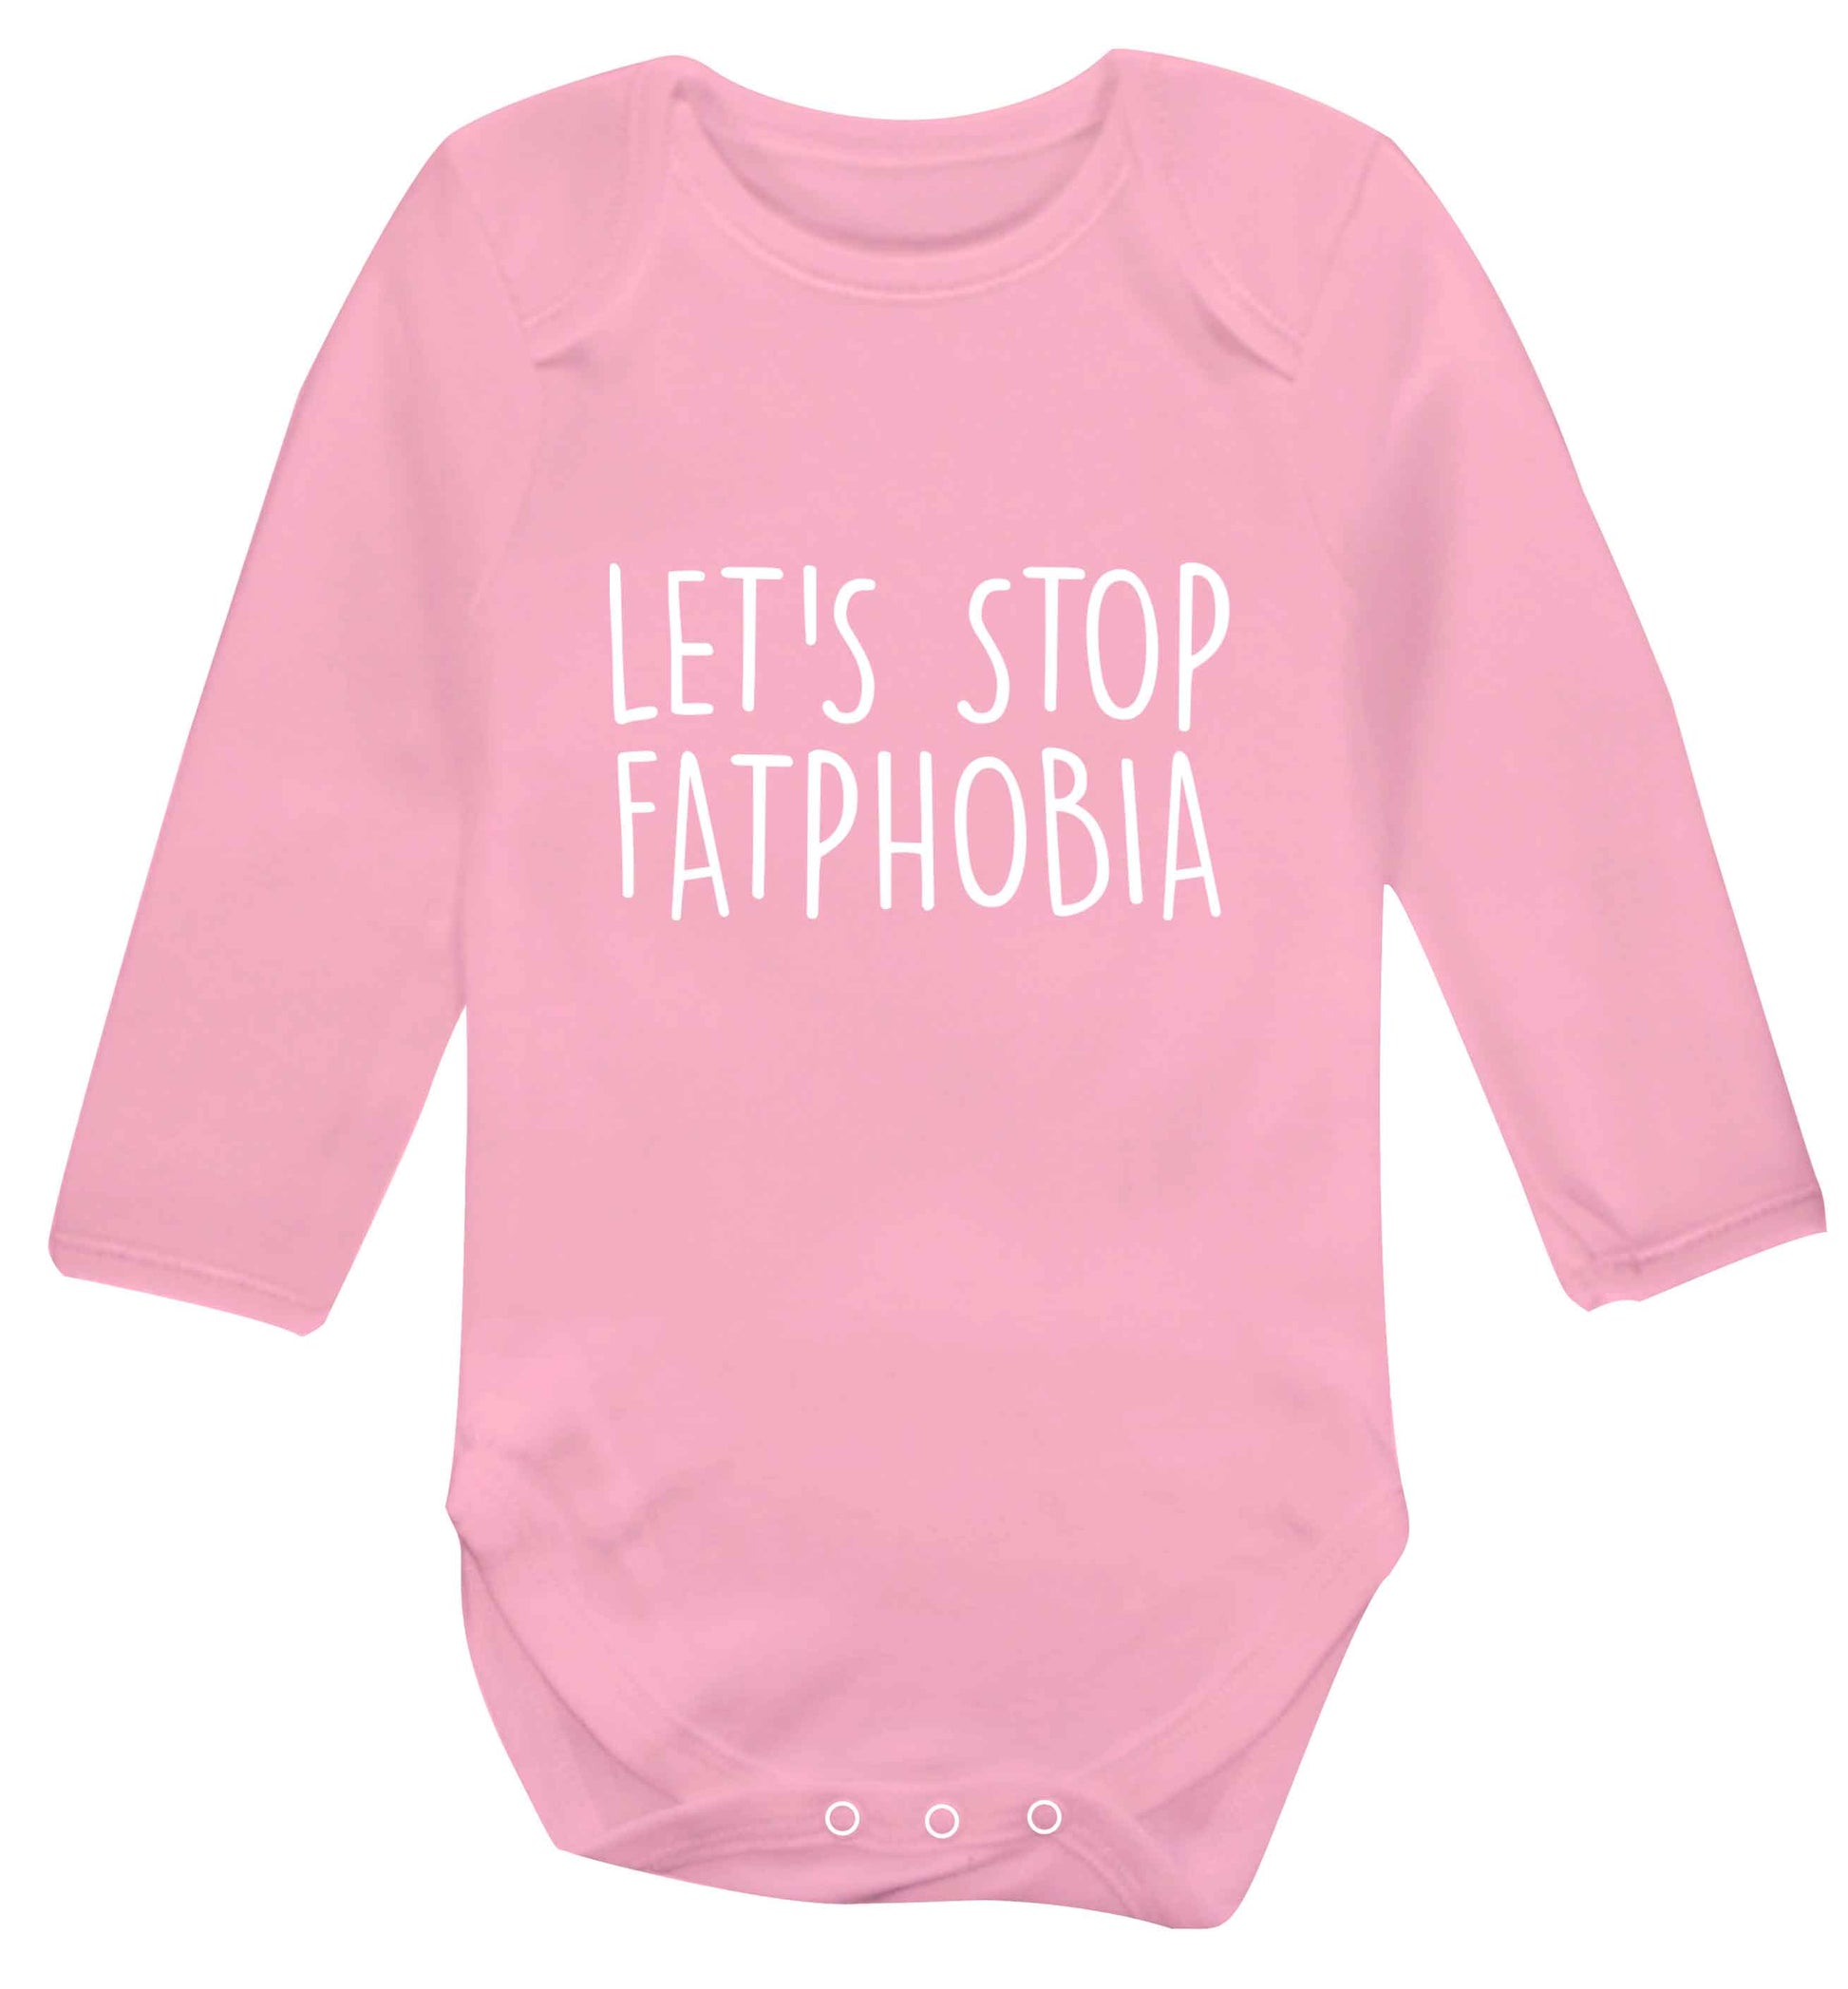 Let's stop fatphobia baby vest long sleeved pale pink 6-12 months